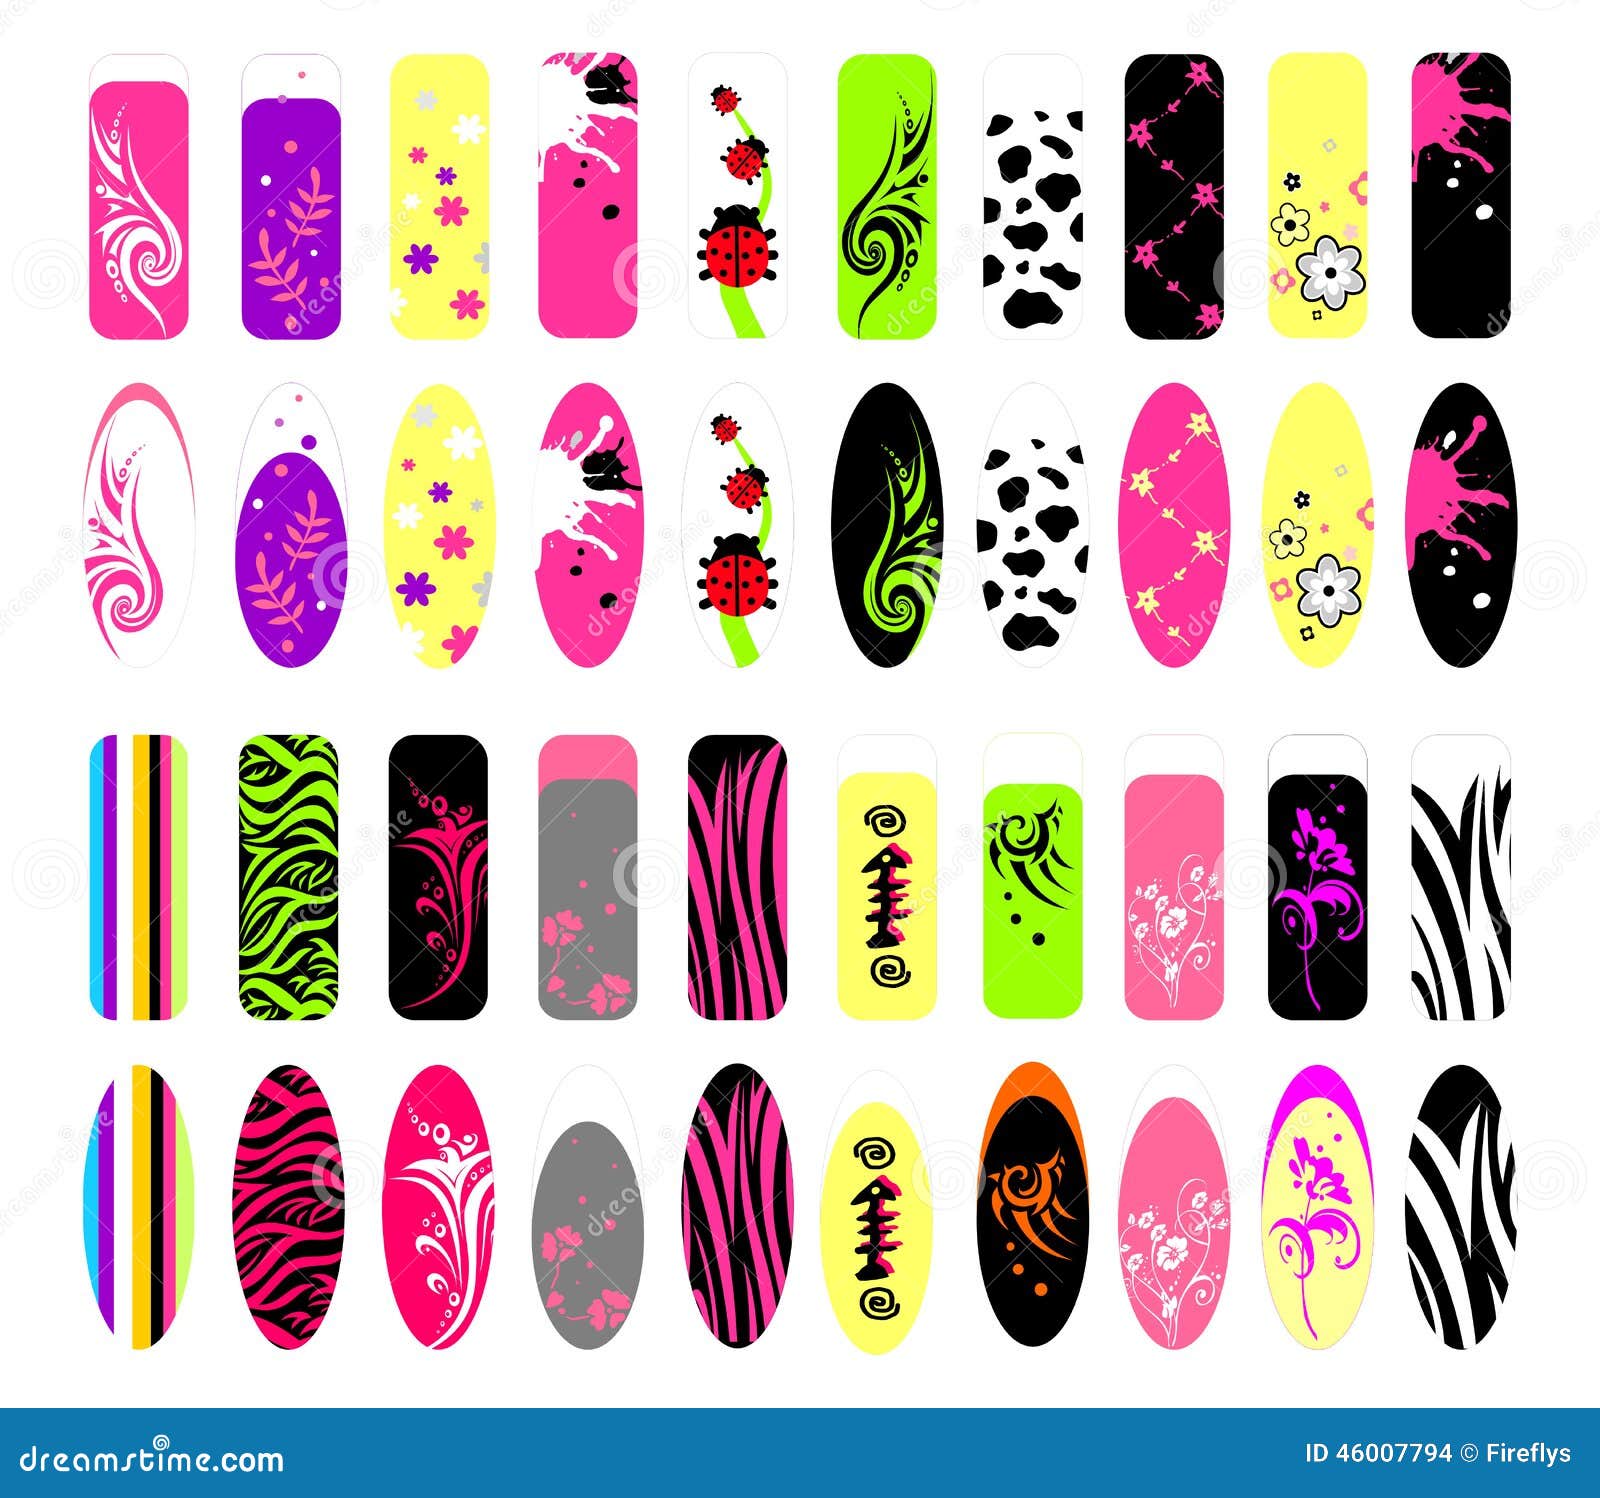 Nail designs stock vector. Illustration of cosmetology - 46007794